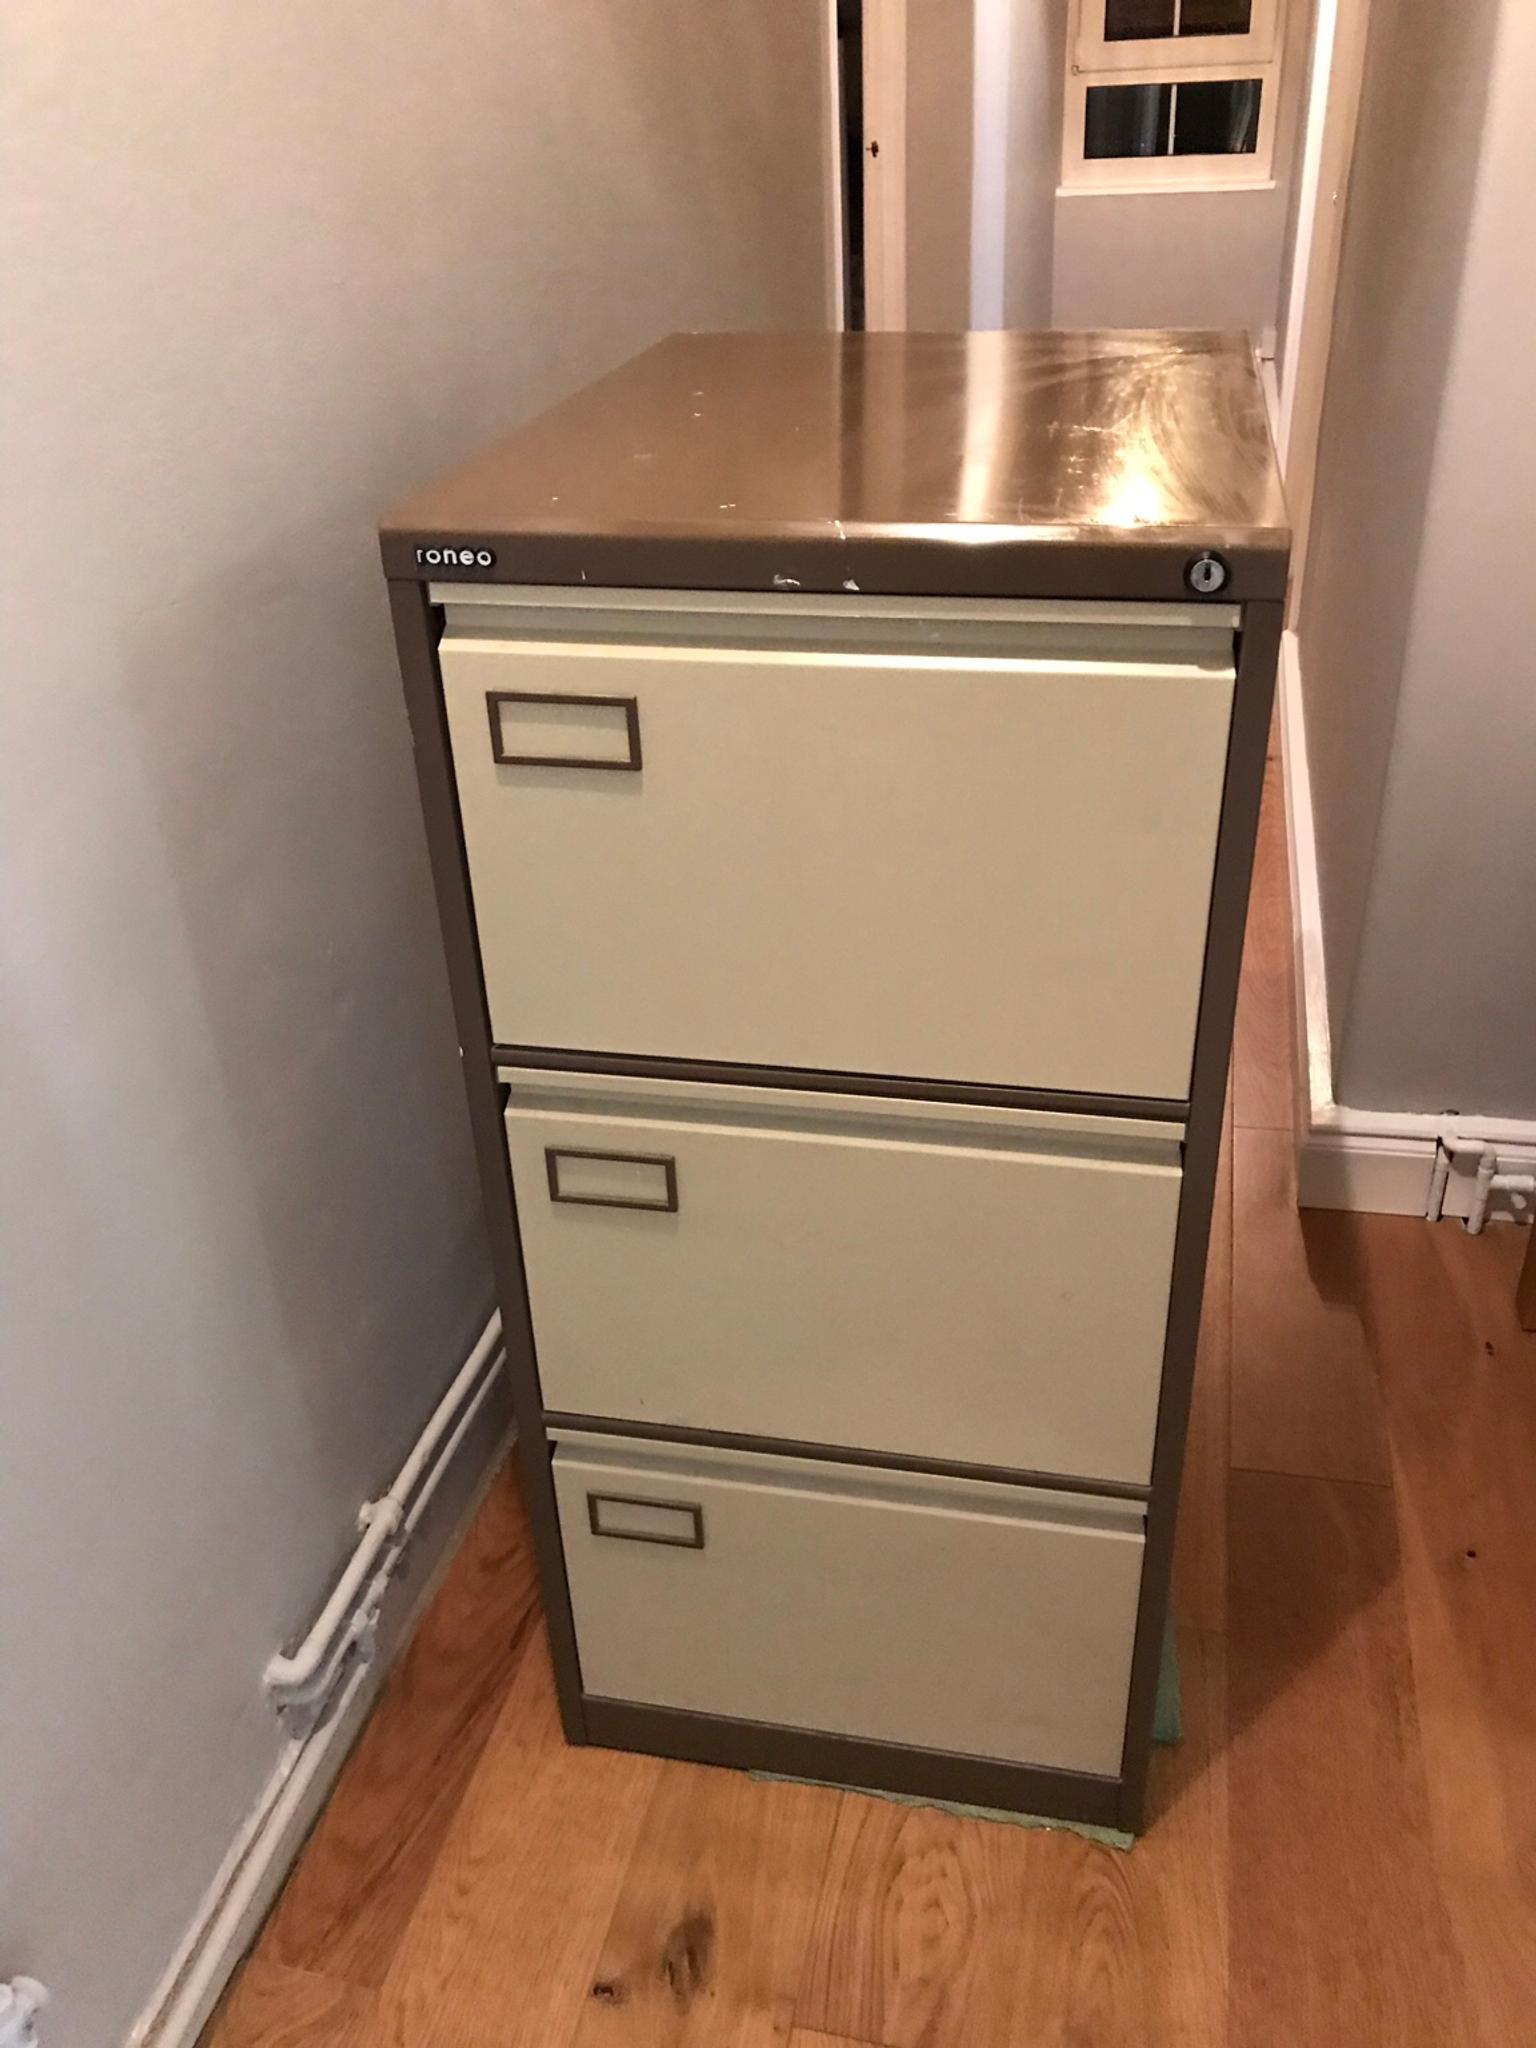 Roneo 3 Draw Filing Cabinet In Se16 London For 20 00 For Sale